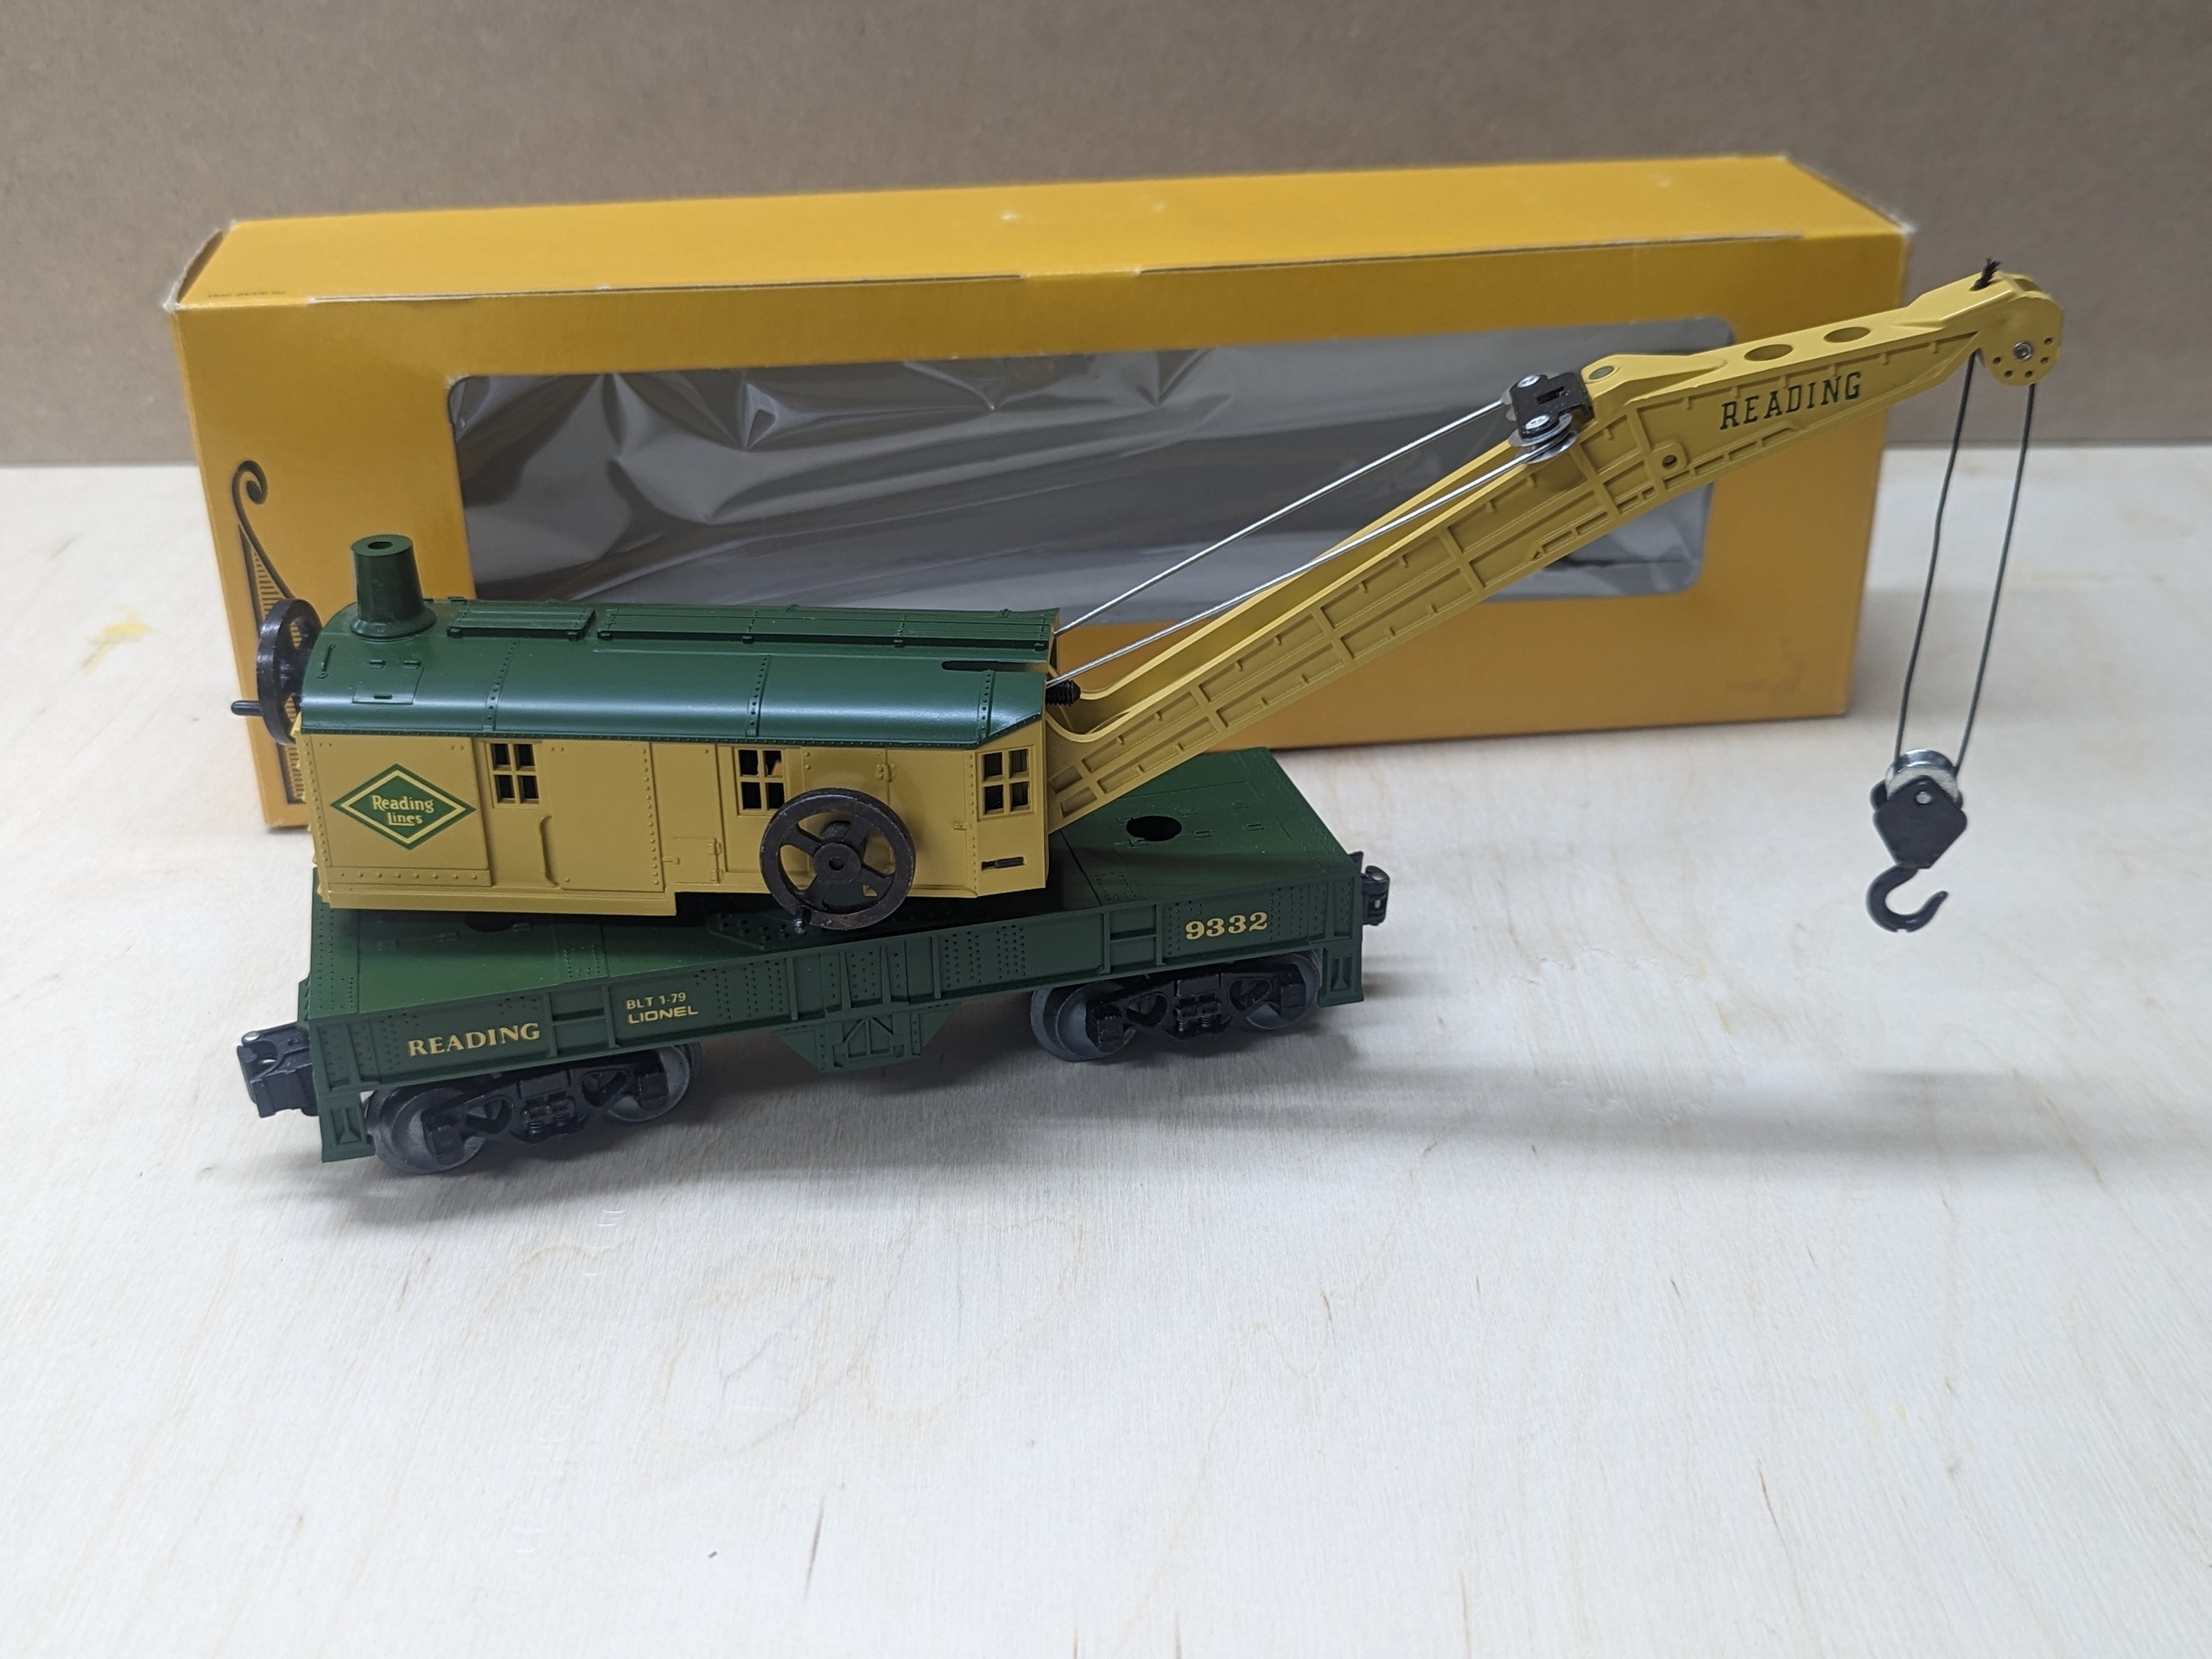 Lionel 6-9332 Reading Crane Car - Limited Edition - pre-owned